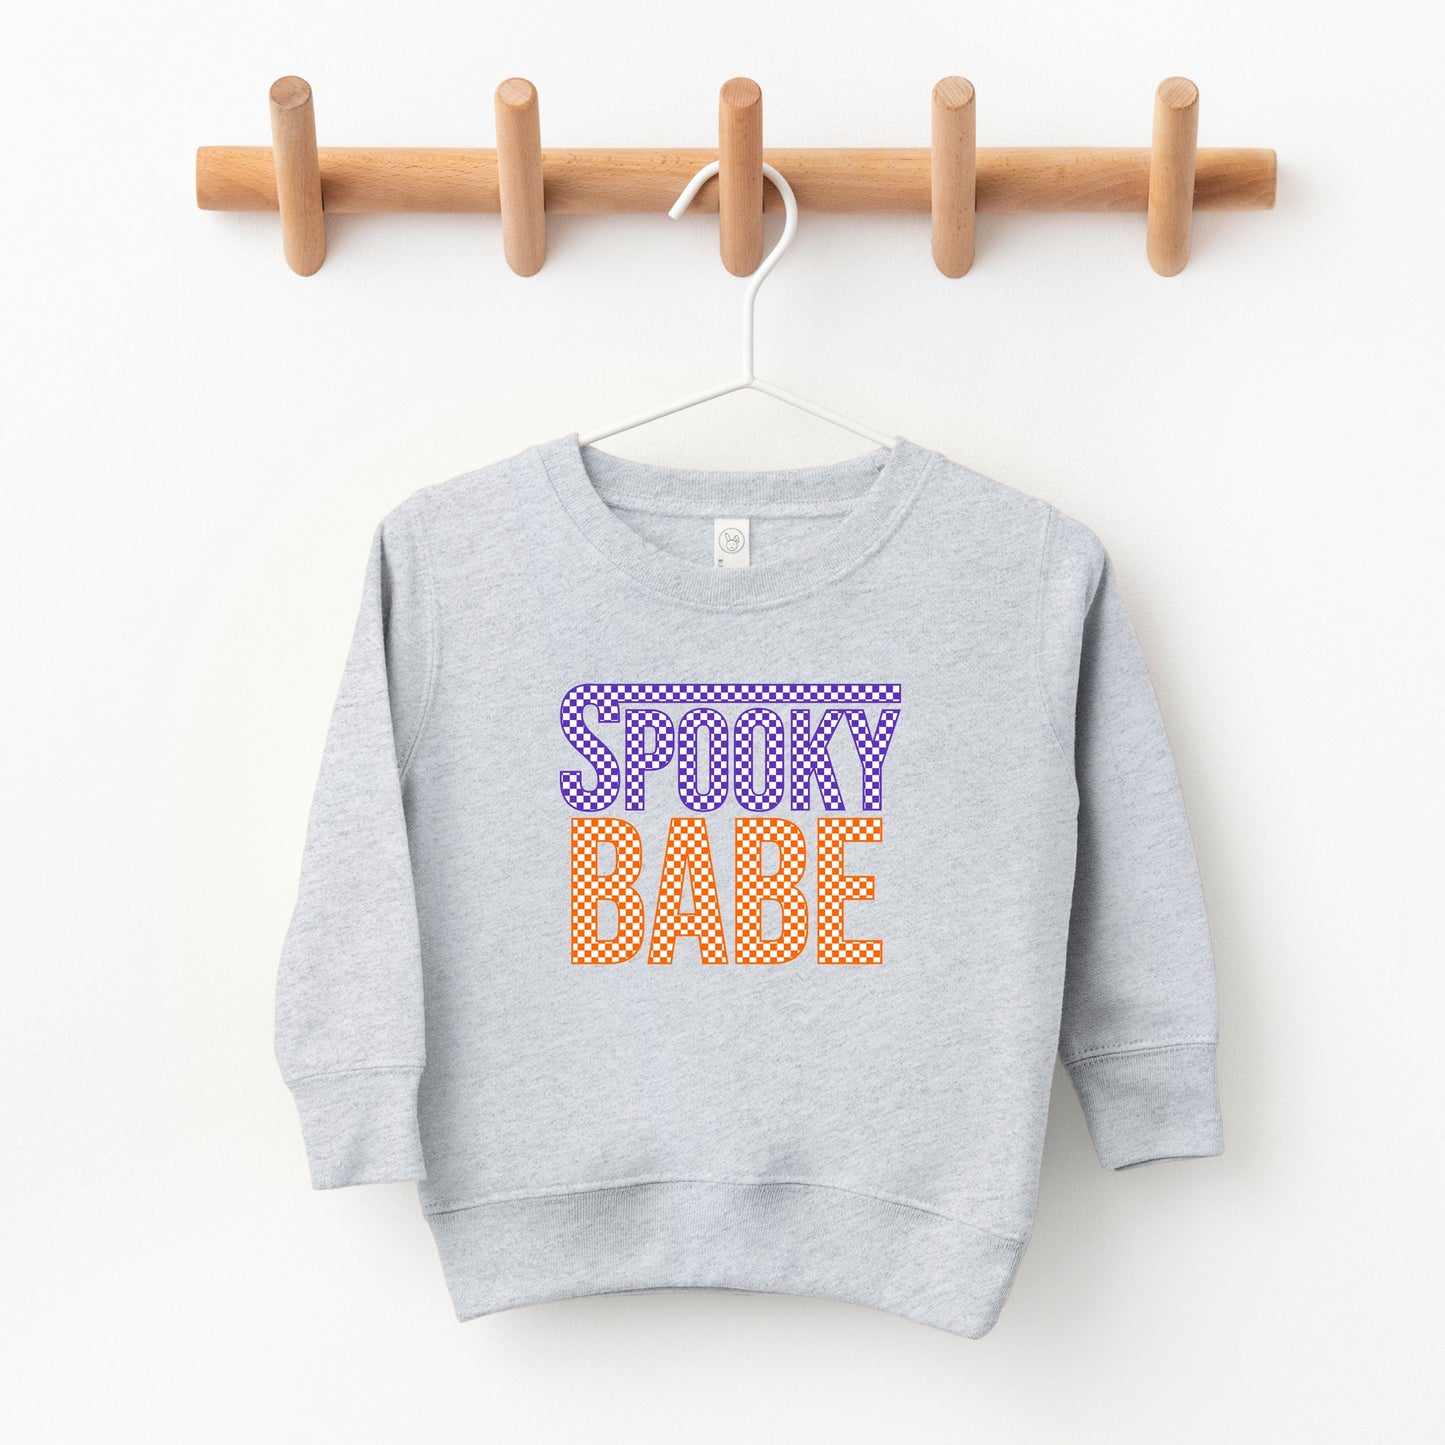 Spooky Babe Checkered | Toddler Graphic Sweatshirt